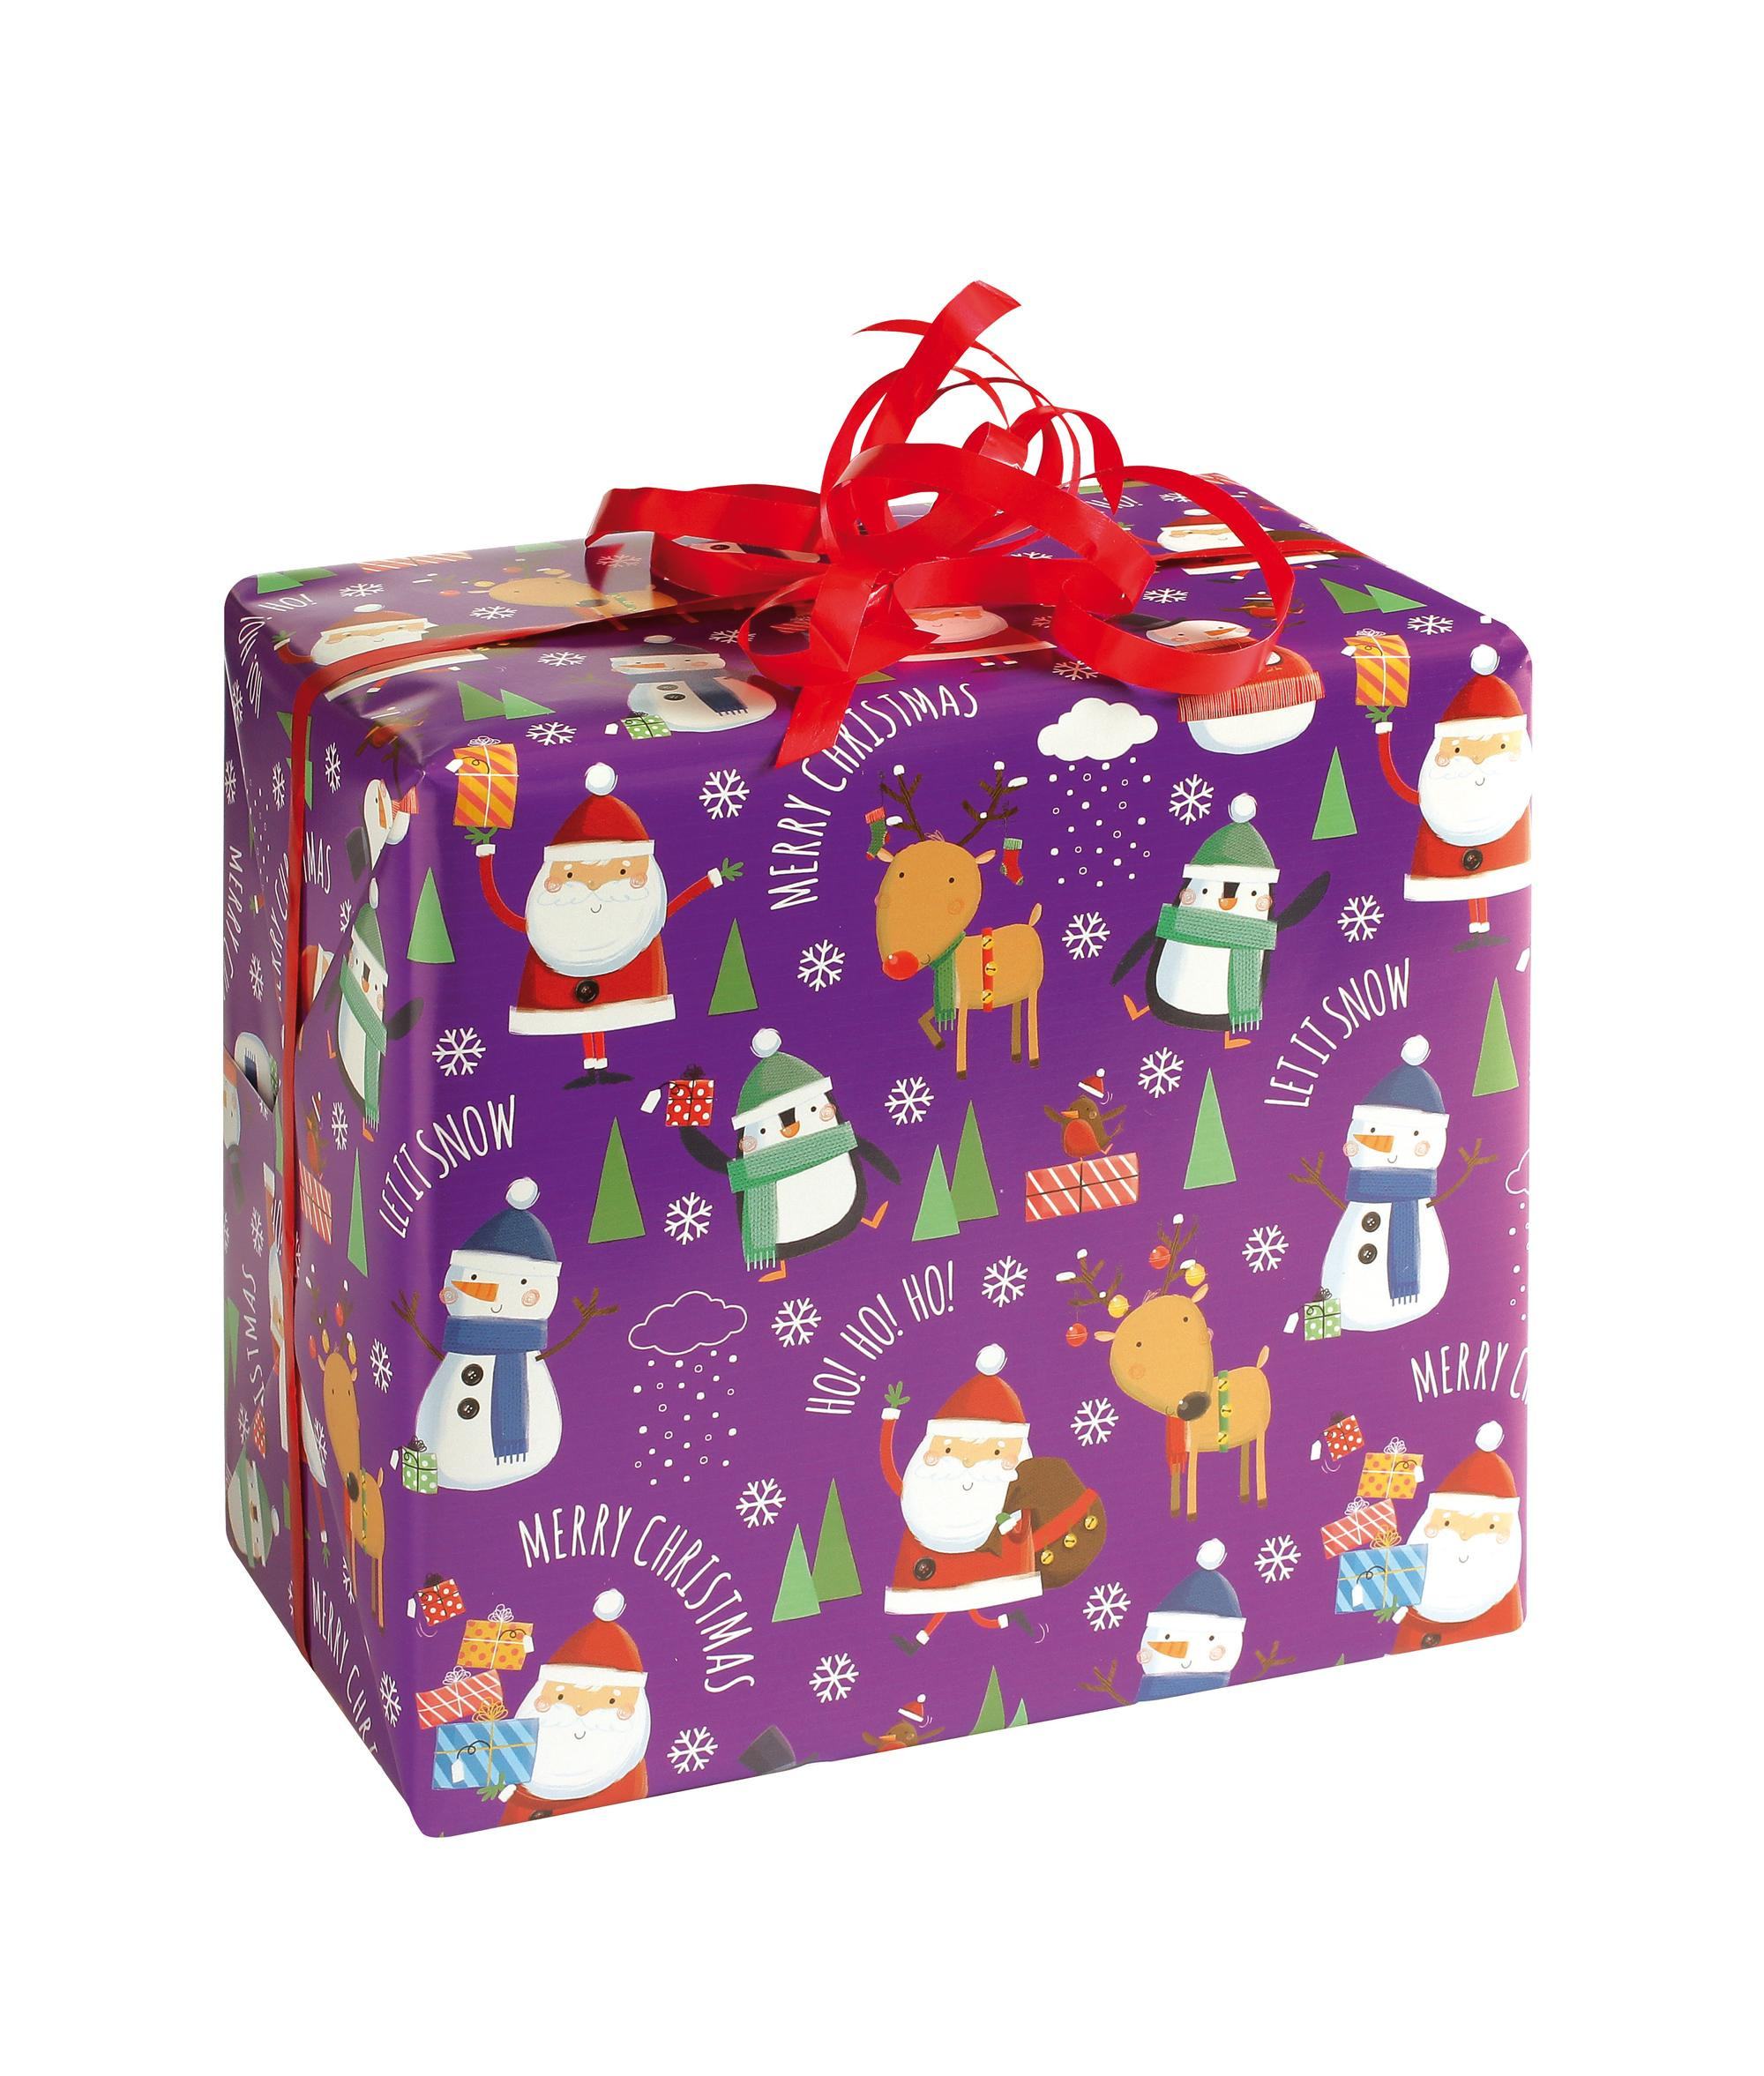 Gift Wrapping For Kids
 9m Giant Novelty Kids Rolled Gift Wrap